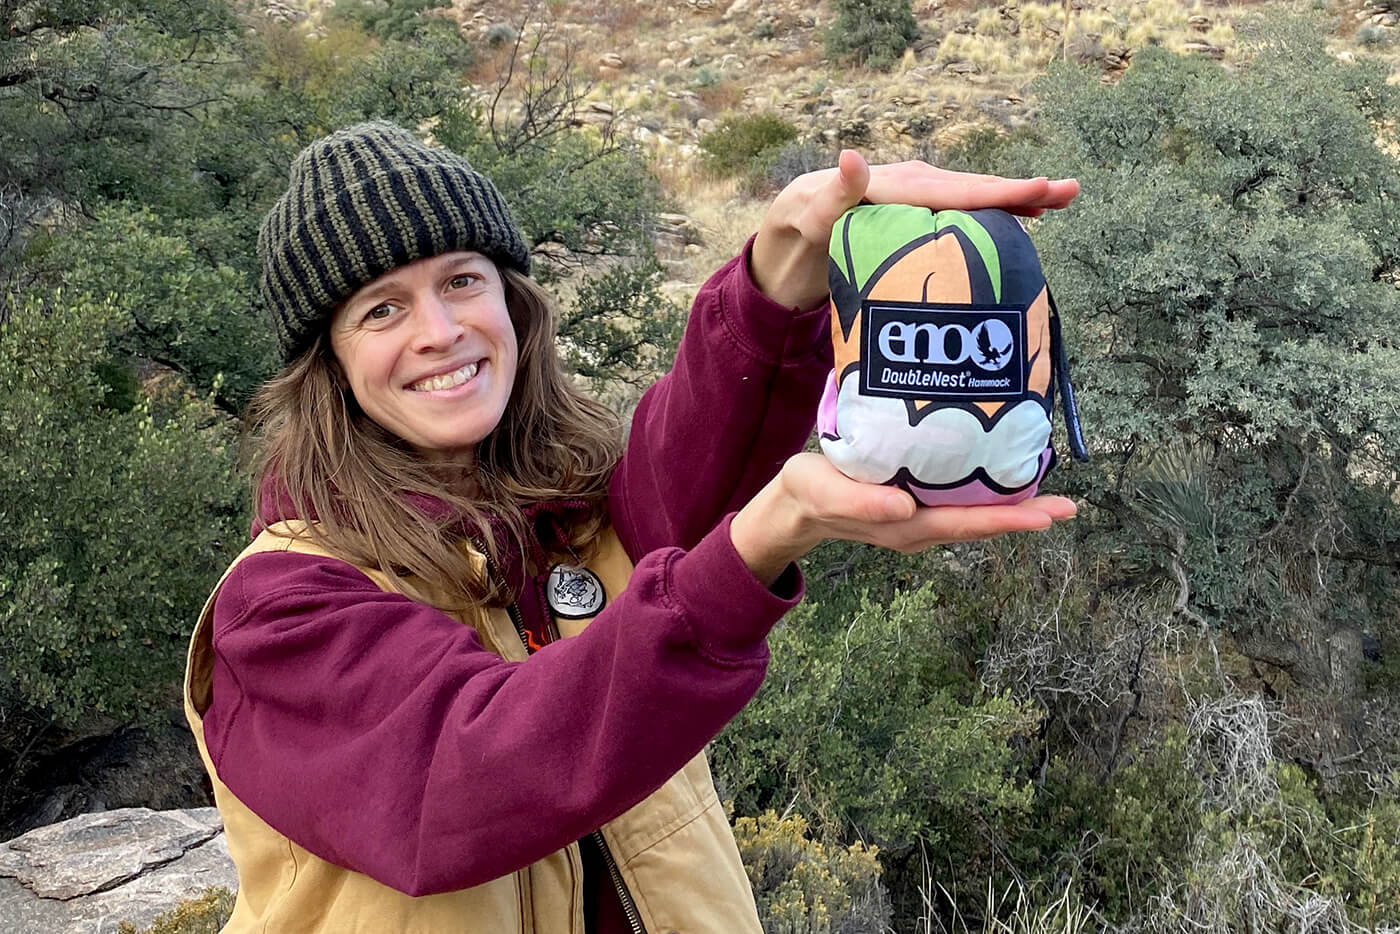 Hannah Eddy holds the Nature Talk hammock stuff sack in her hands as she smiles at the camera.